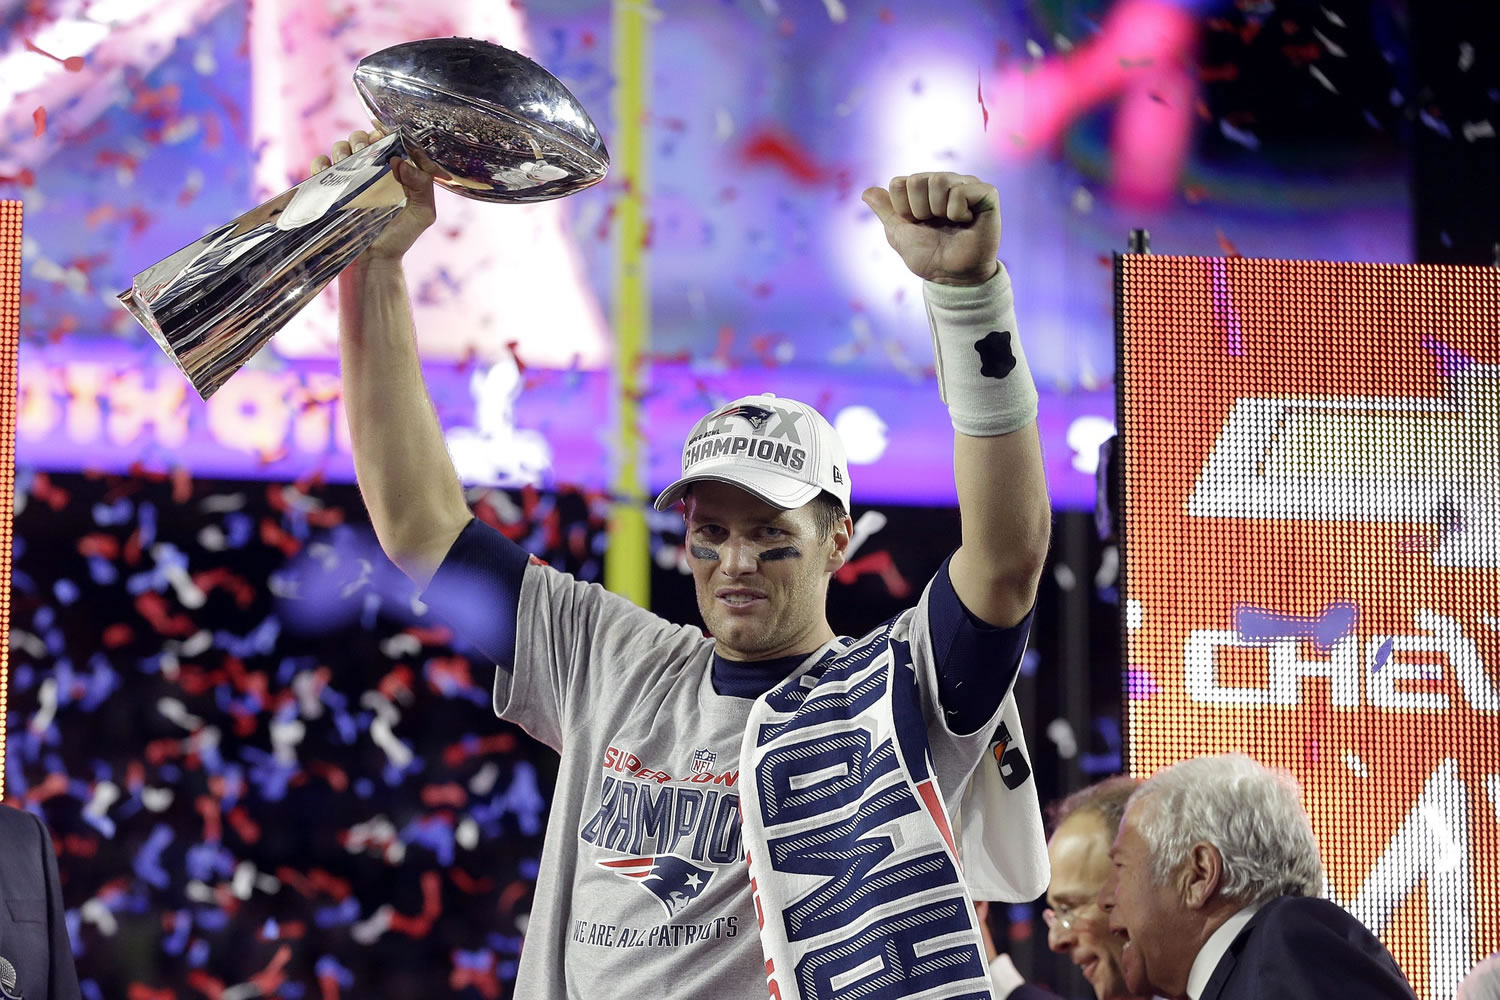 New England Patriots quarterback Tom Brady holds up Vince Lombardi Trophy after the Patriots defeated the Seattle Seahawks 28-24 in NFL Super Bowl XLIX football game Sunday, Feb.